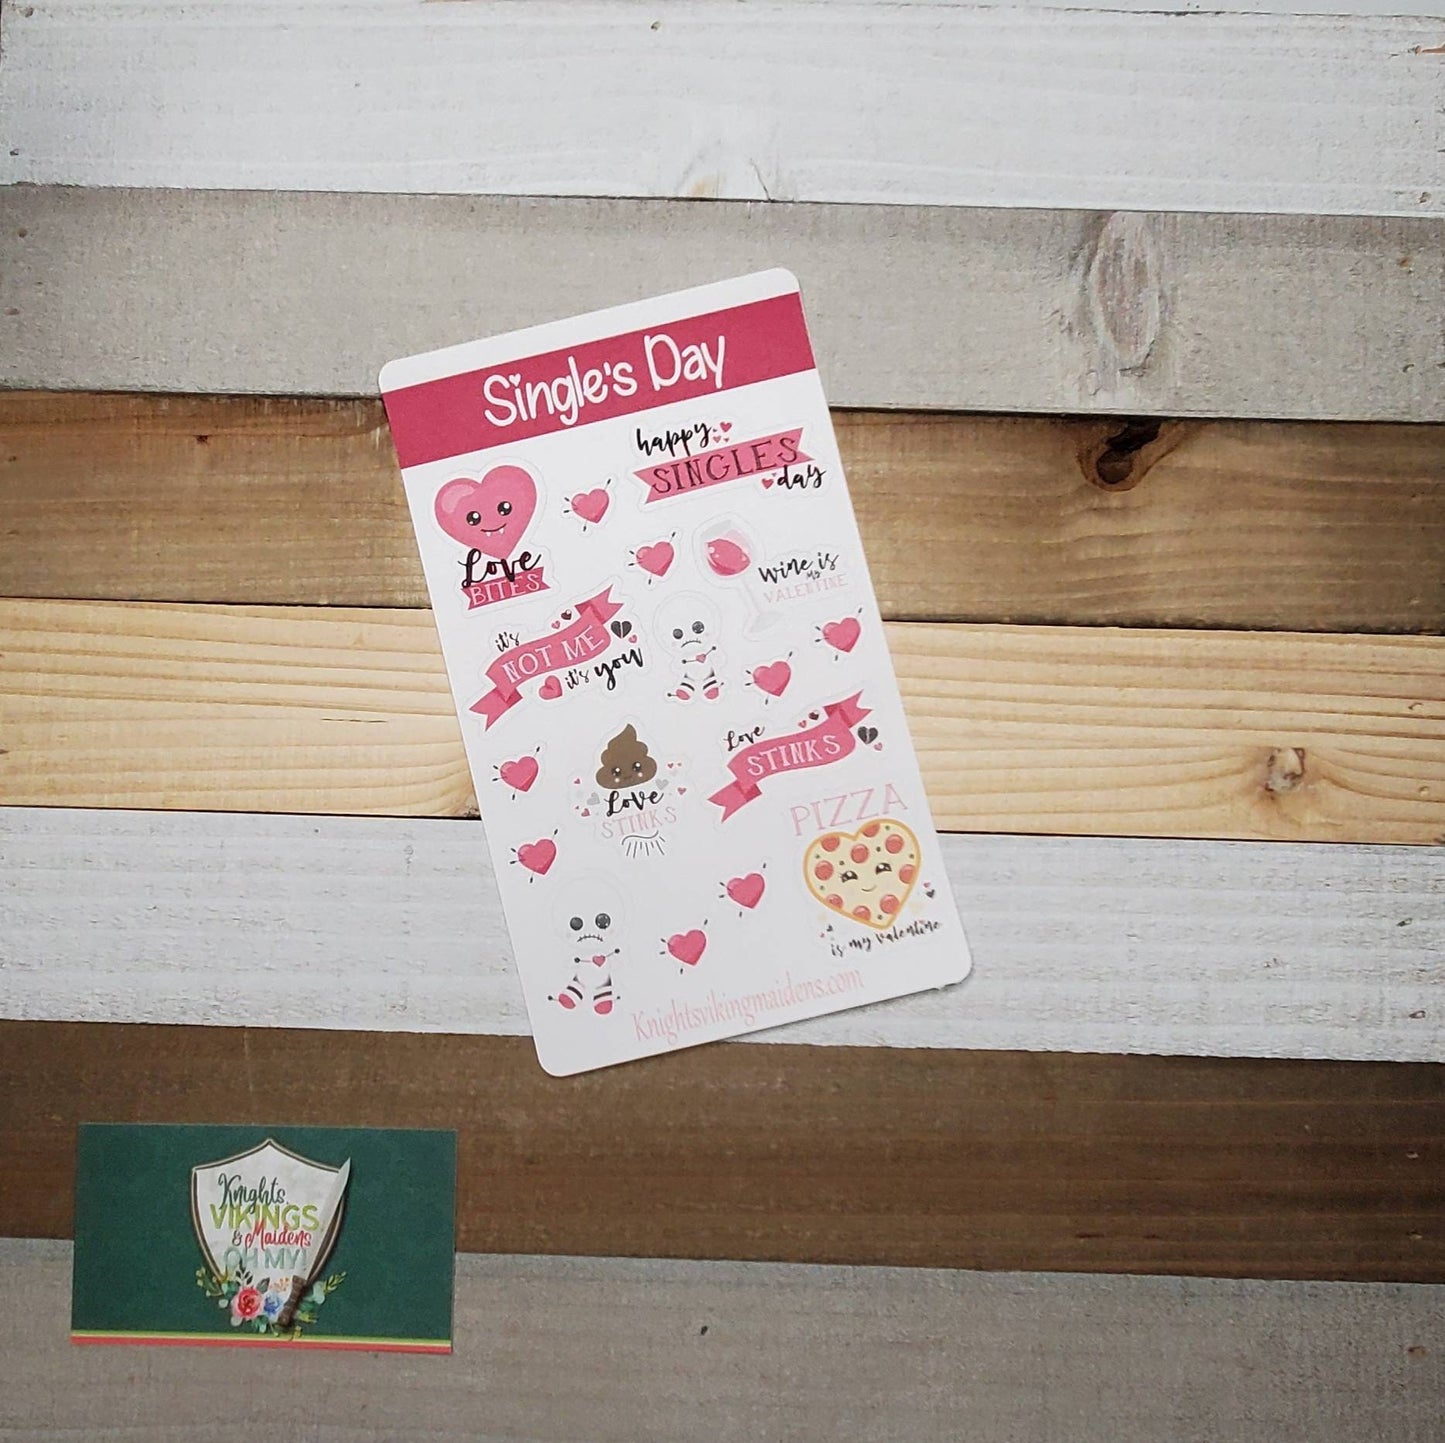 Single's Day, Anti Valentine's Day Stickers, Hearts, Broken Hearts, Break Up, Bullet Journal, Planning Stickers, Kiss Cut Stickers